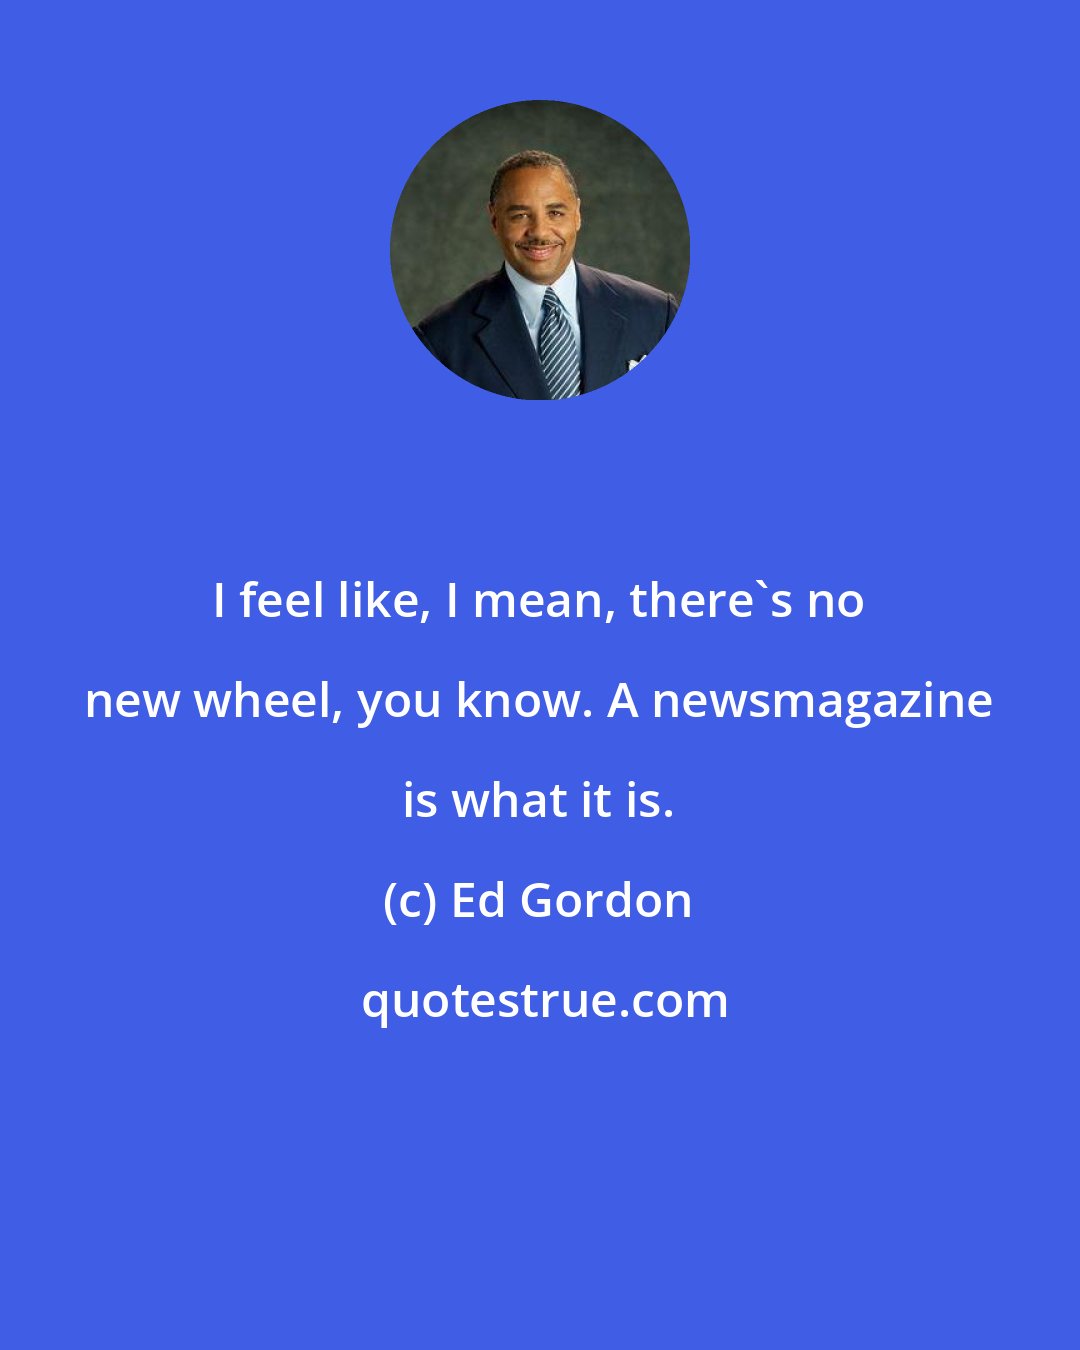 Ed Gordon: I feel like, I mean, there's no new wheel, you know. A newsmagazine is what it is.